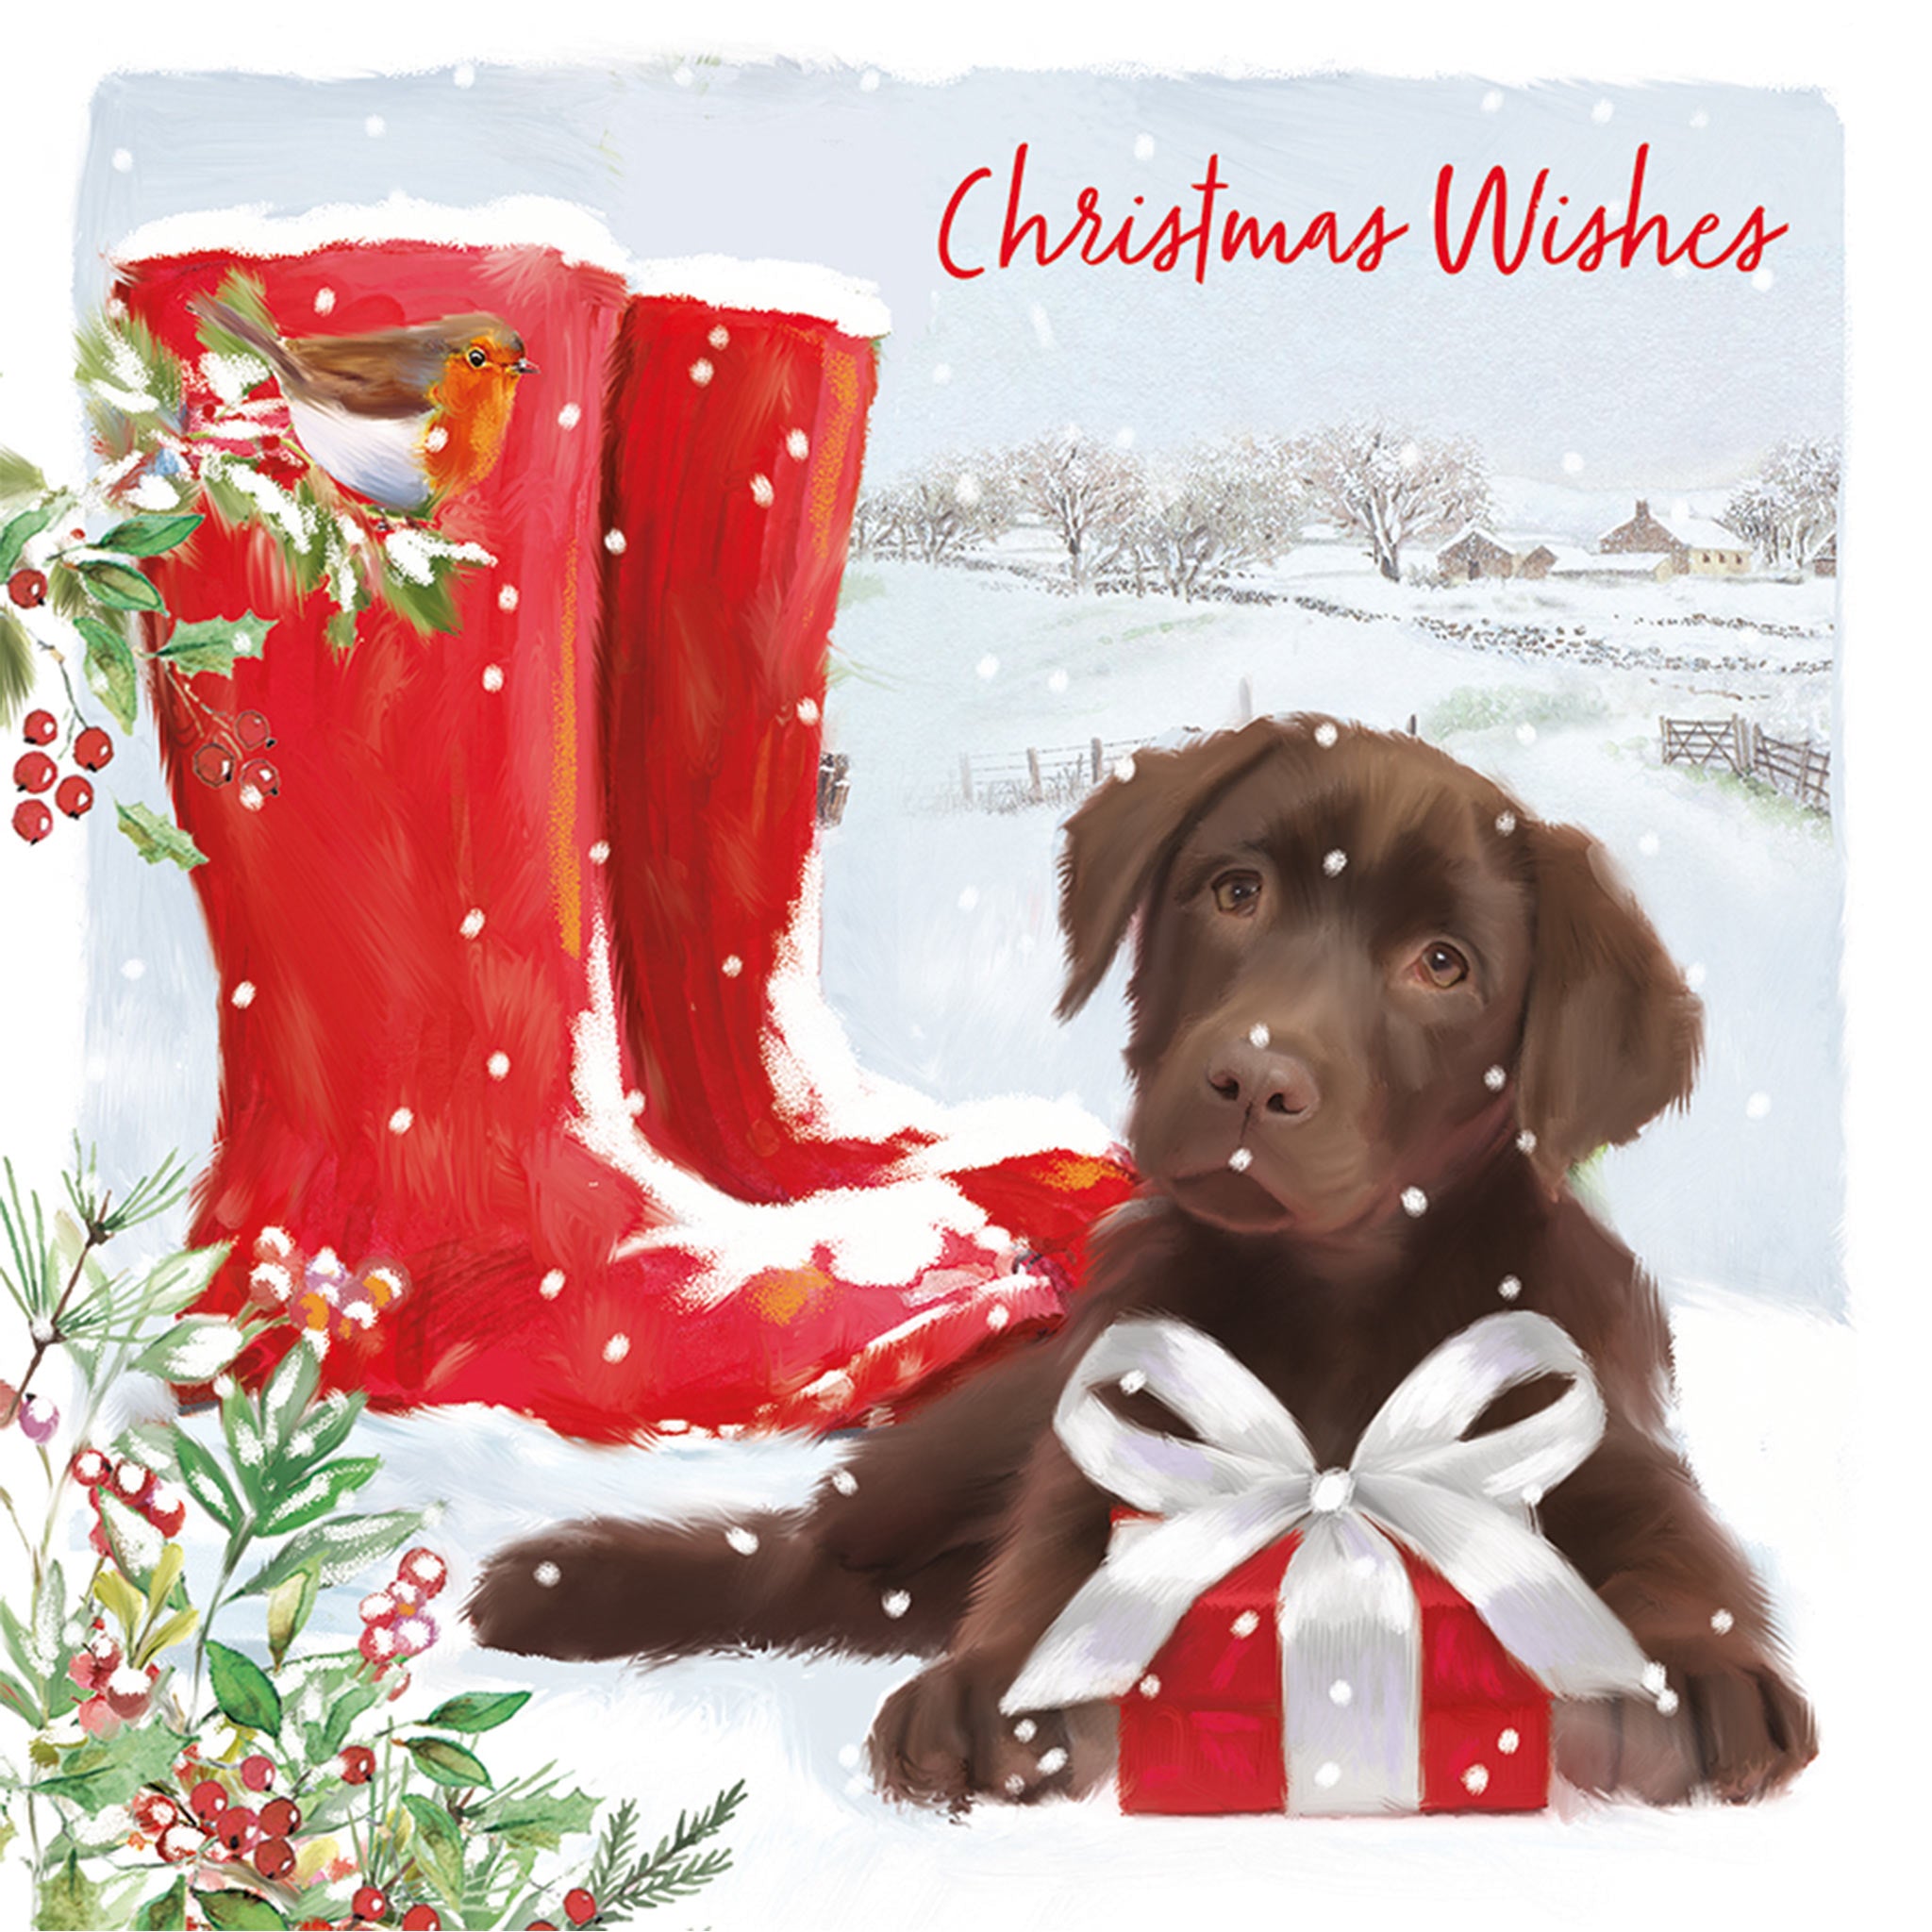 The design on this Christmas card is an illustration of a Chocolate Labrador puppy and wrapped gift beside a pair of and red wellington boots. Text on the card reads "Christmas Wishes".